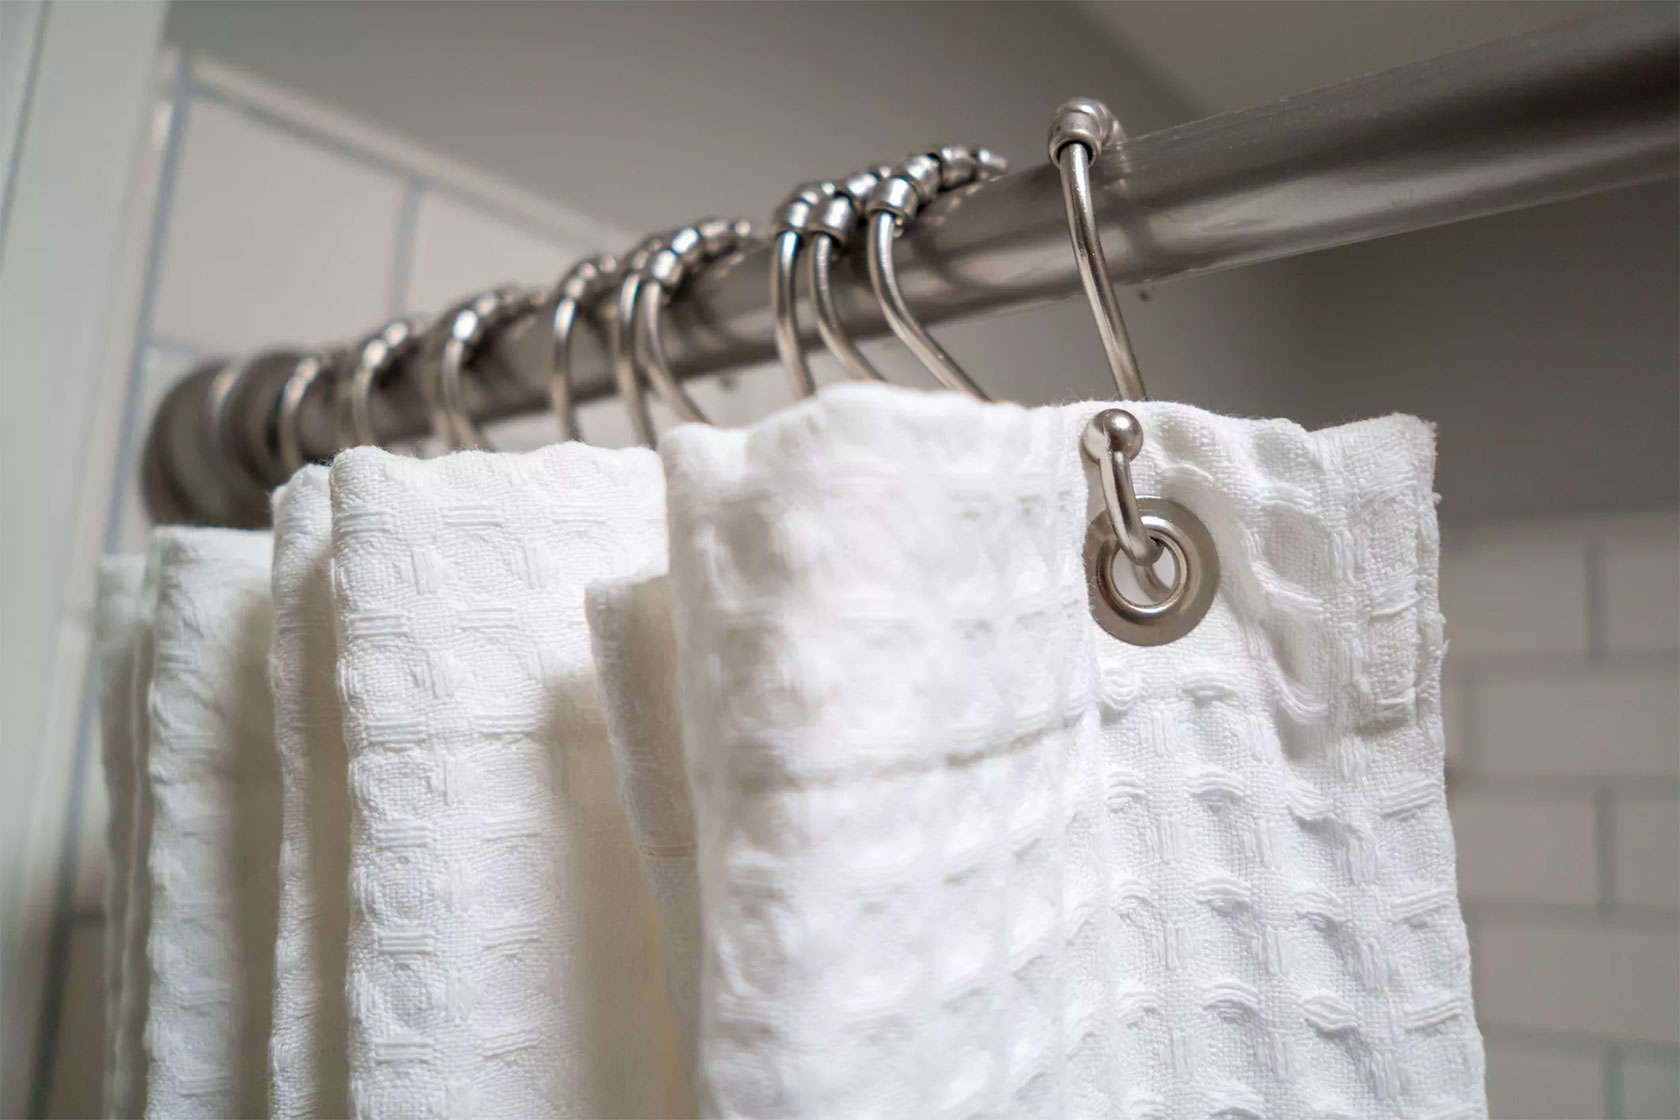  How to Hang a Shower Curtain Rod - Complete Installation Guide |  My ...